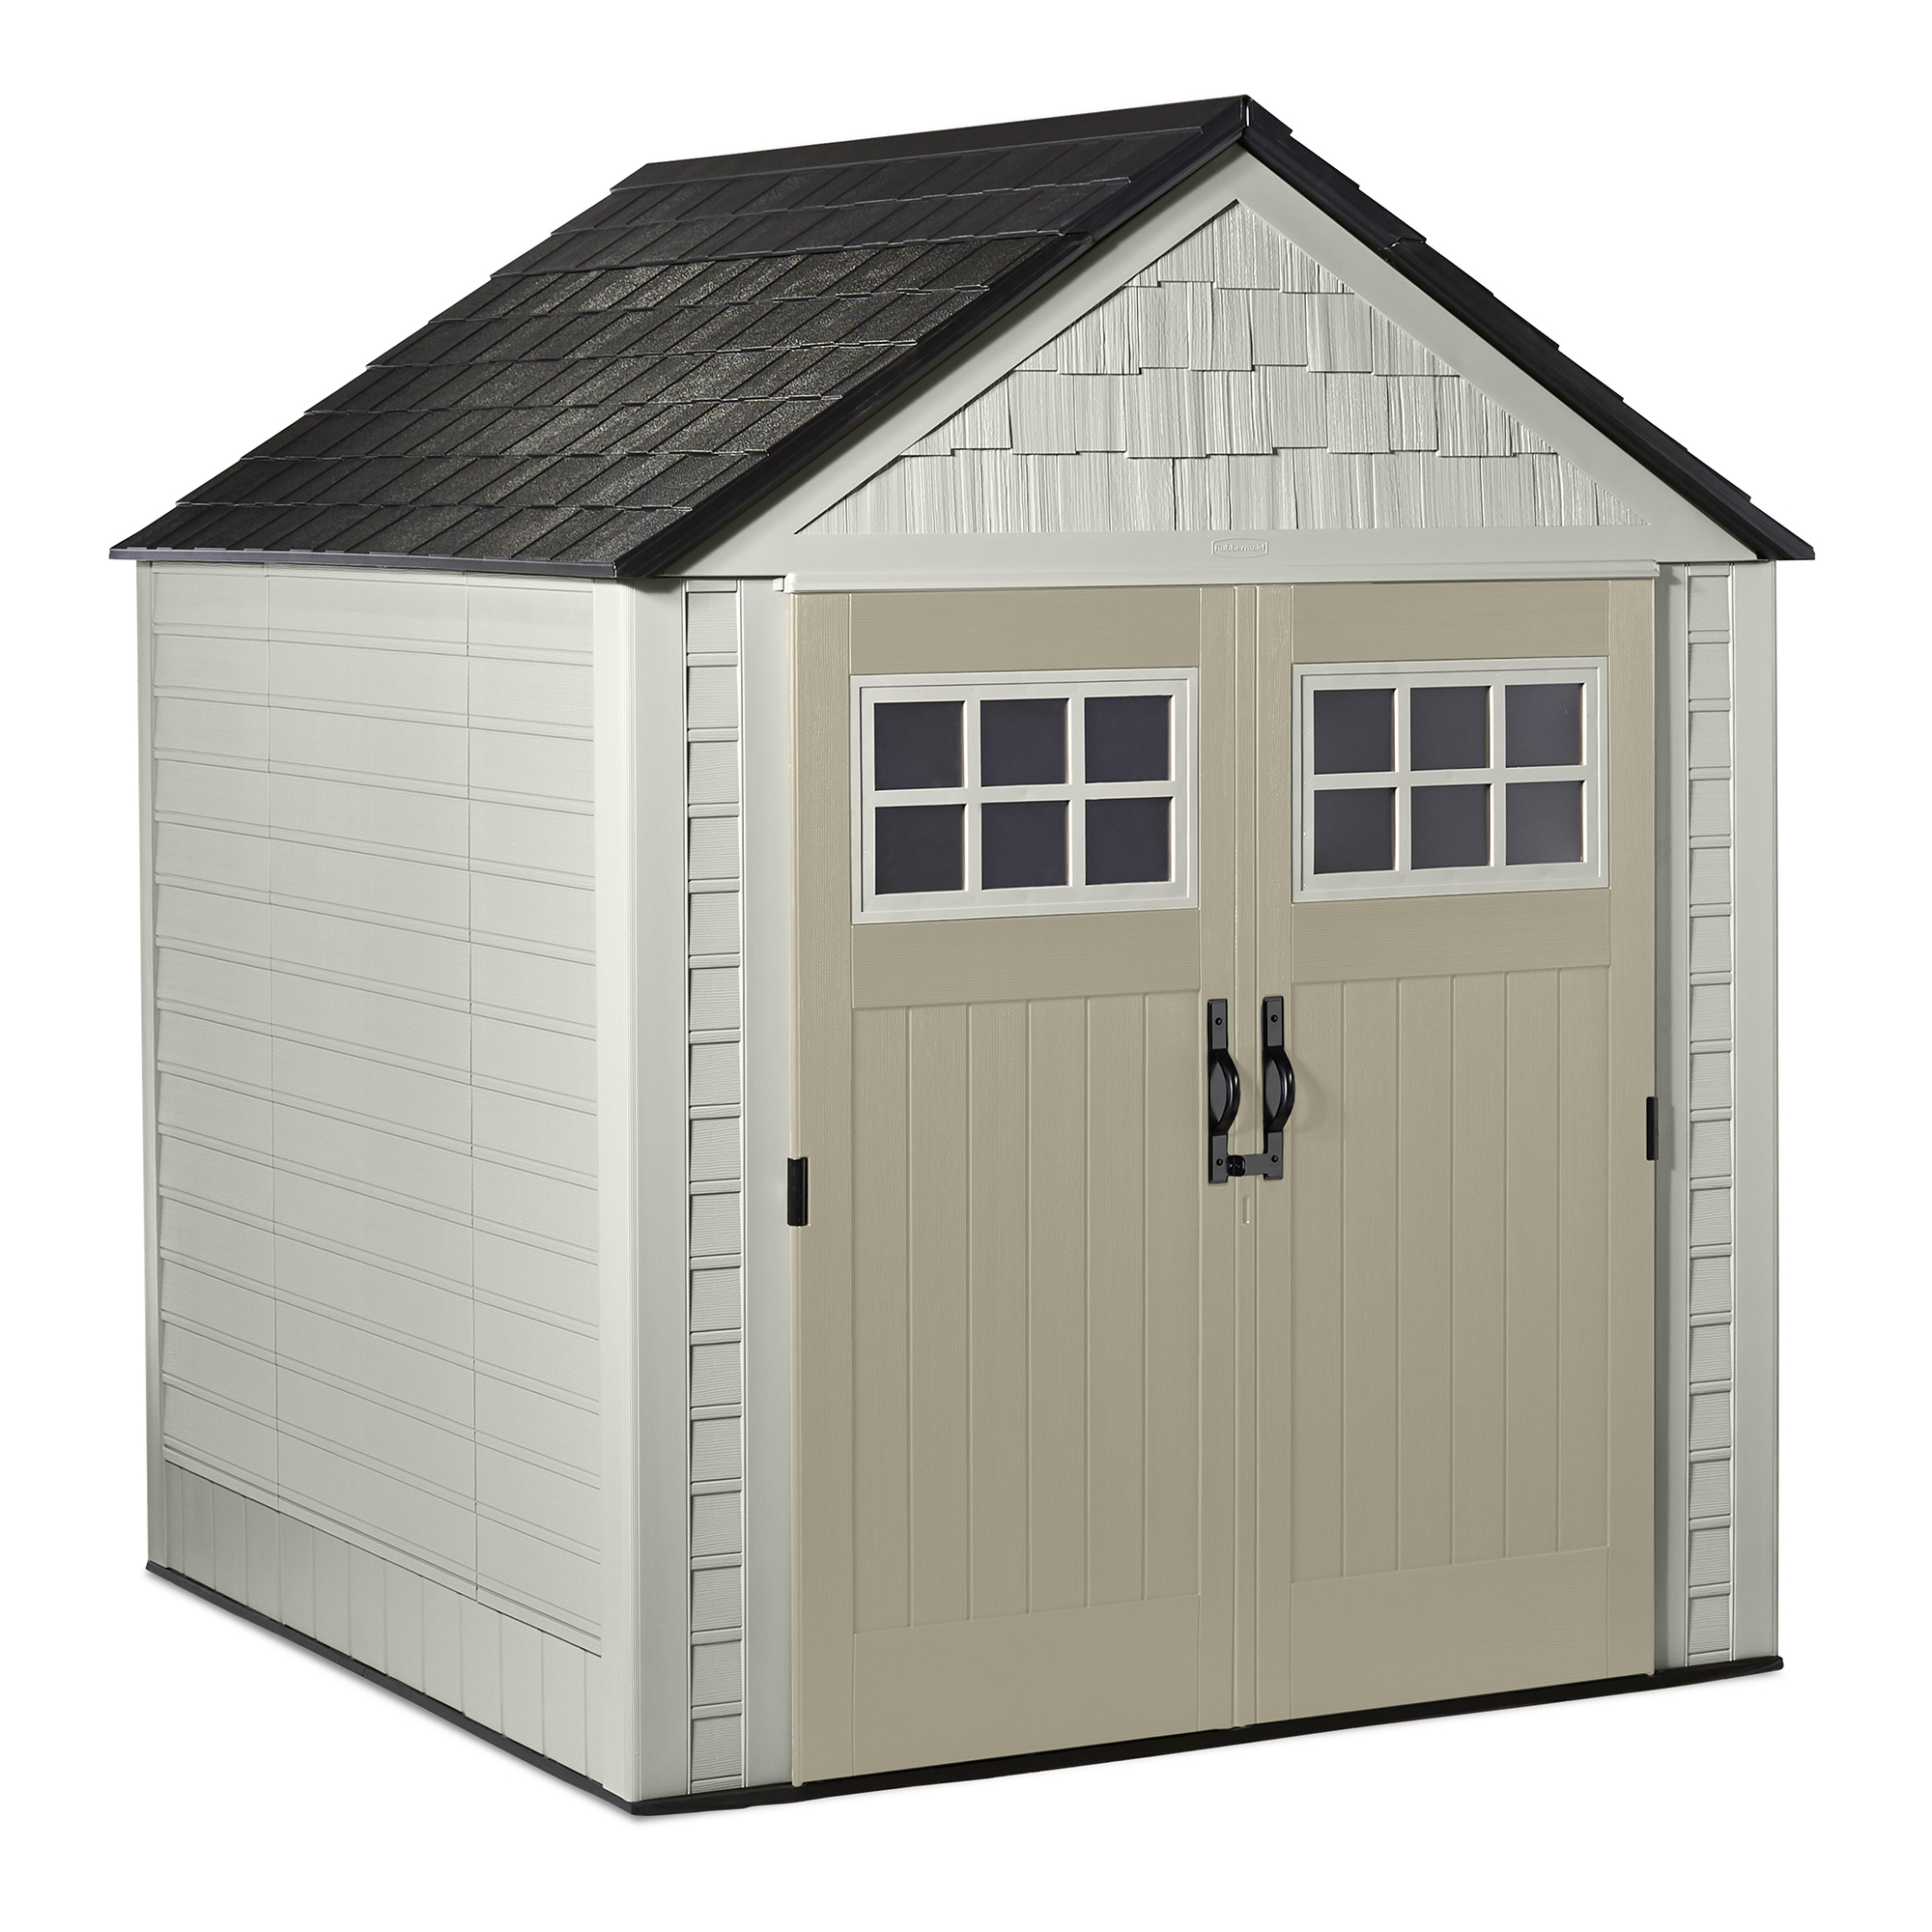 Rubbermaid 7x7 Ft Durable Weather Resistant Resin Outdoor Storage Shed 